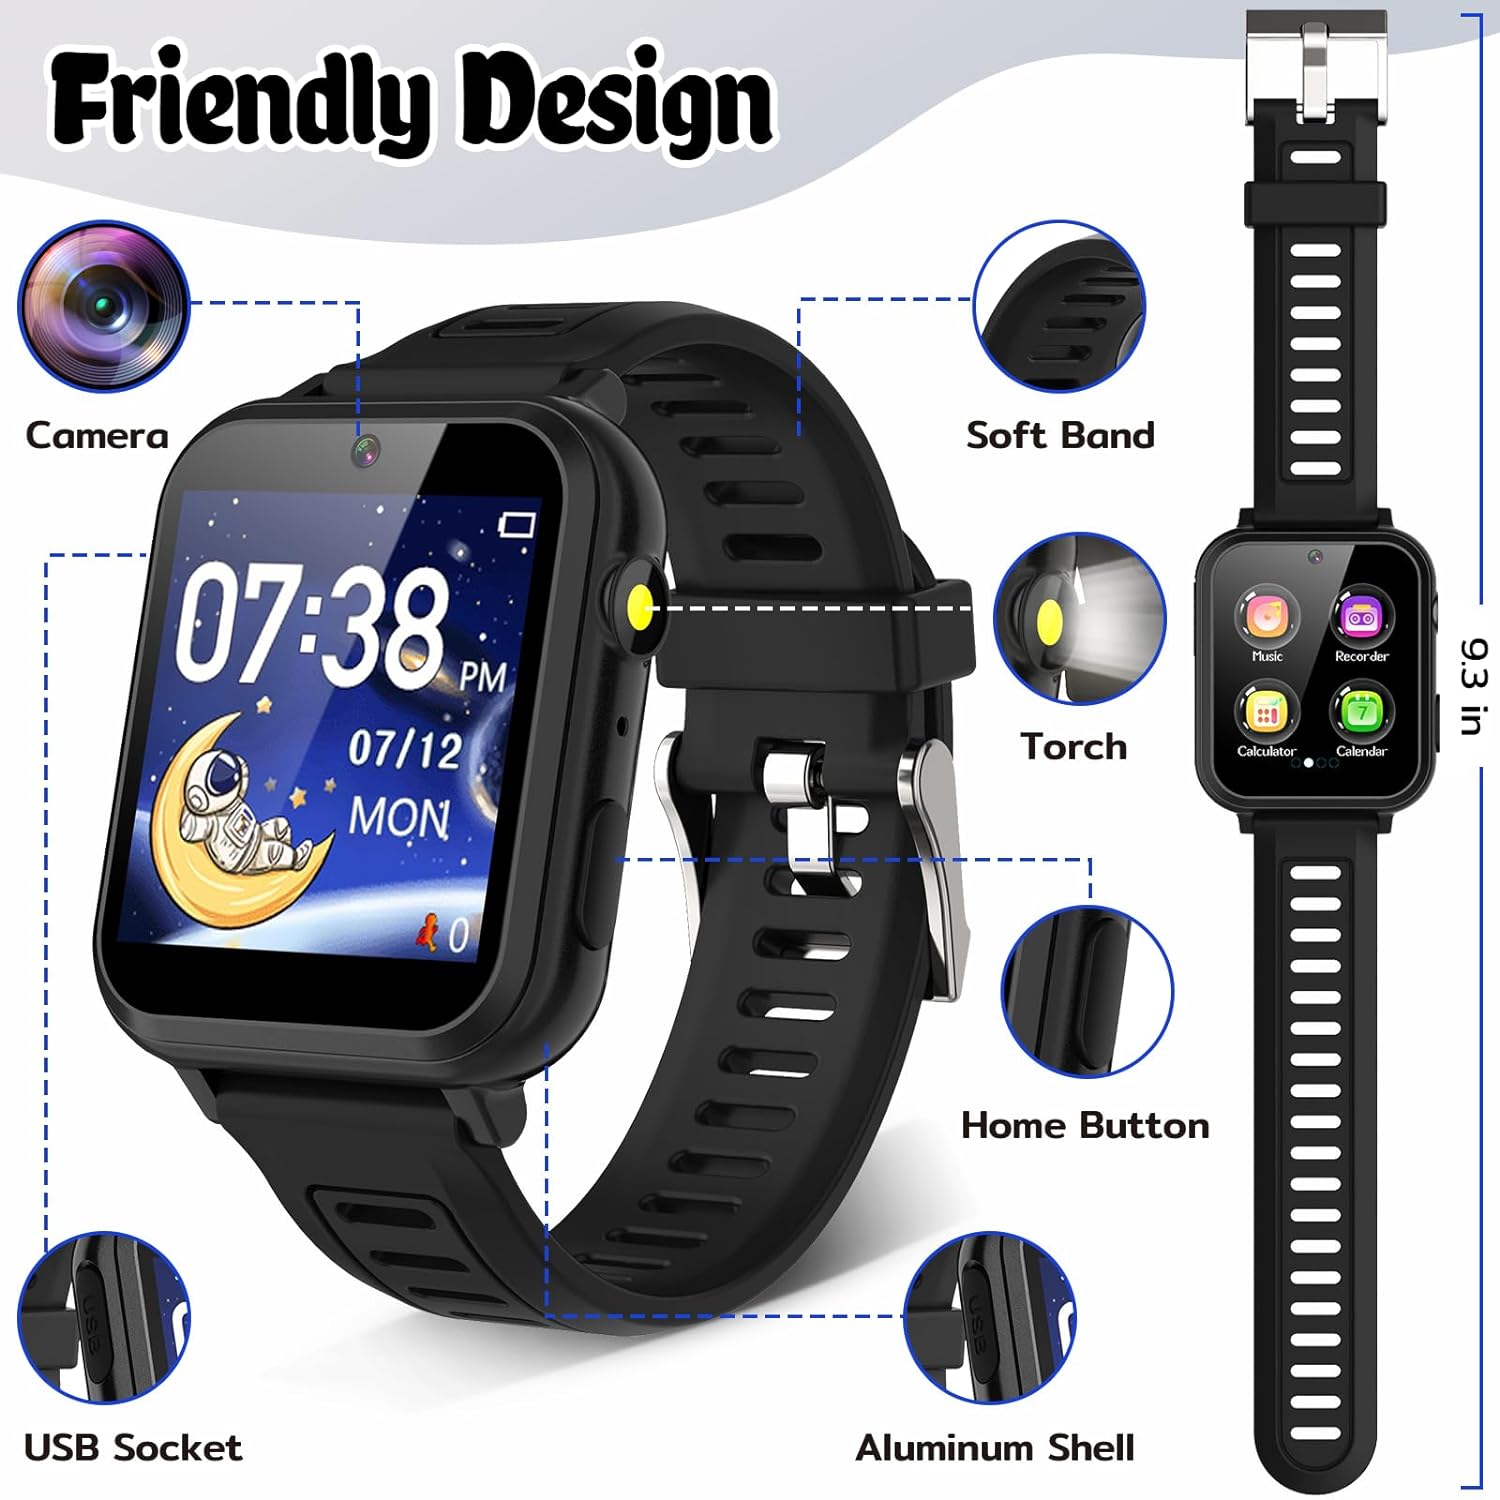 Waterproof Touch Screen Smart Watch with 24 Puzzle Games HD Camera Music Player Pedometer Alarm Clock and Selfie Cam - Great Learning Toy for Kids (Black)